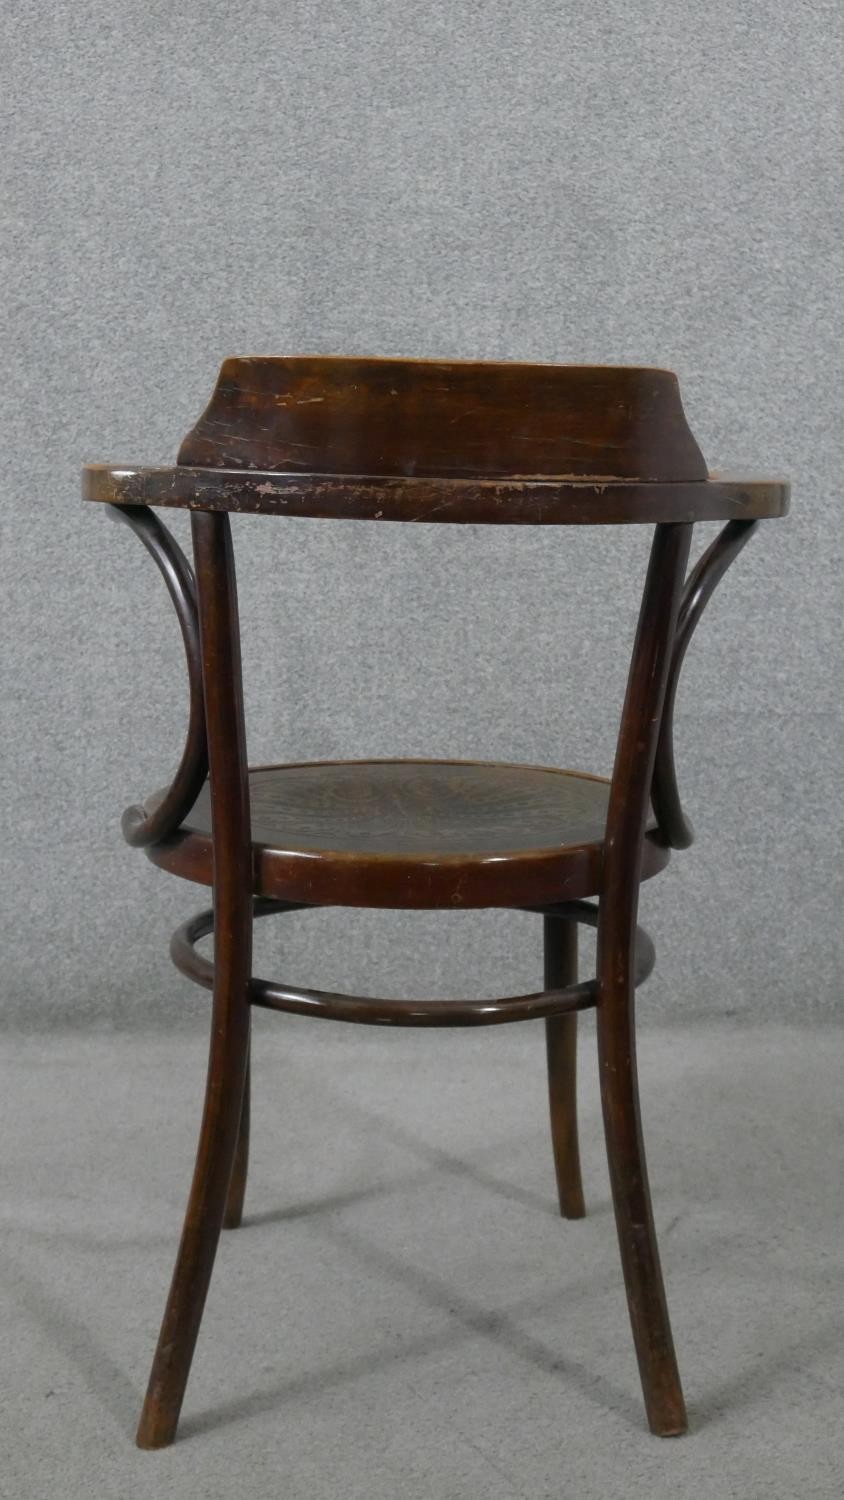 A late 19th/early 20th century Thonet style bentwood open armchair, with a circular pokerwork seat - Image 7 of 8